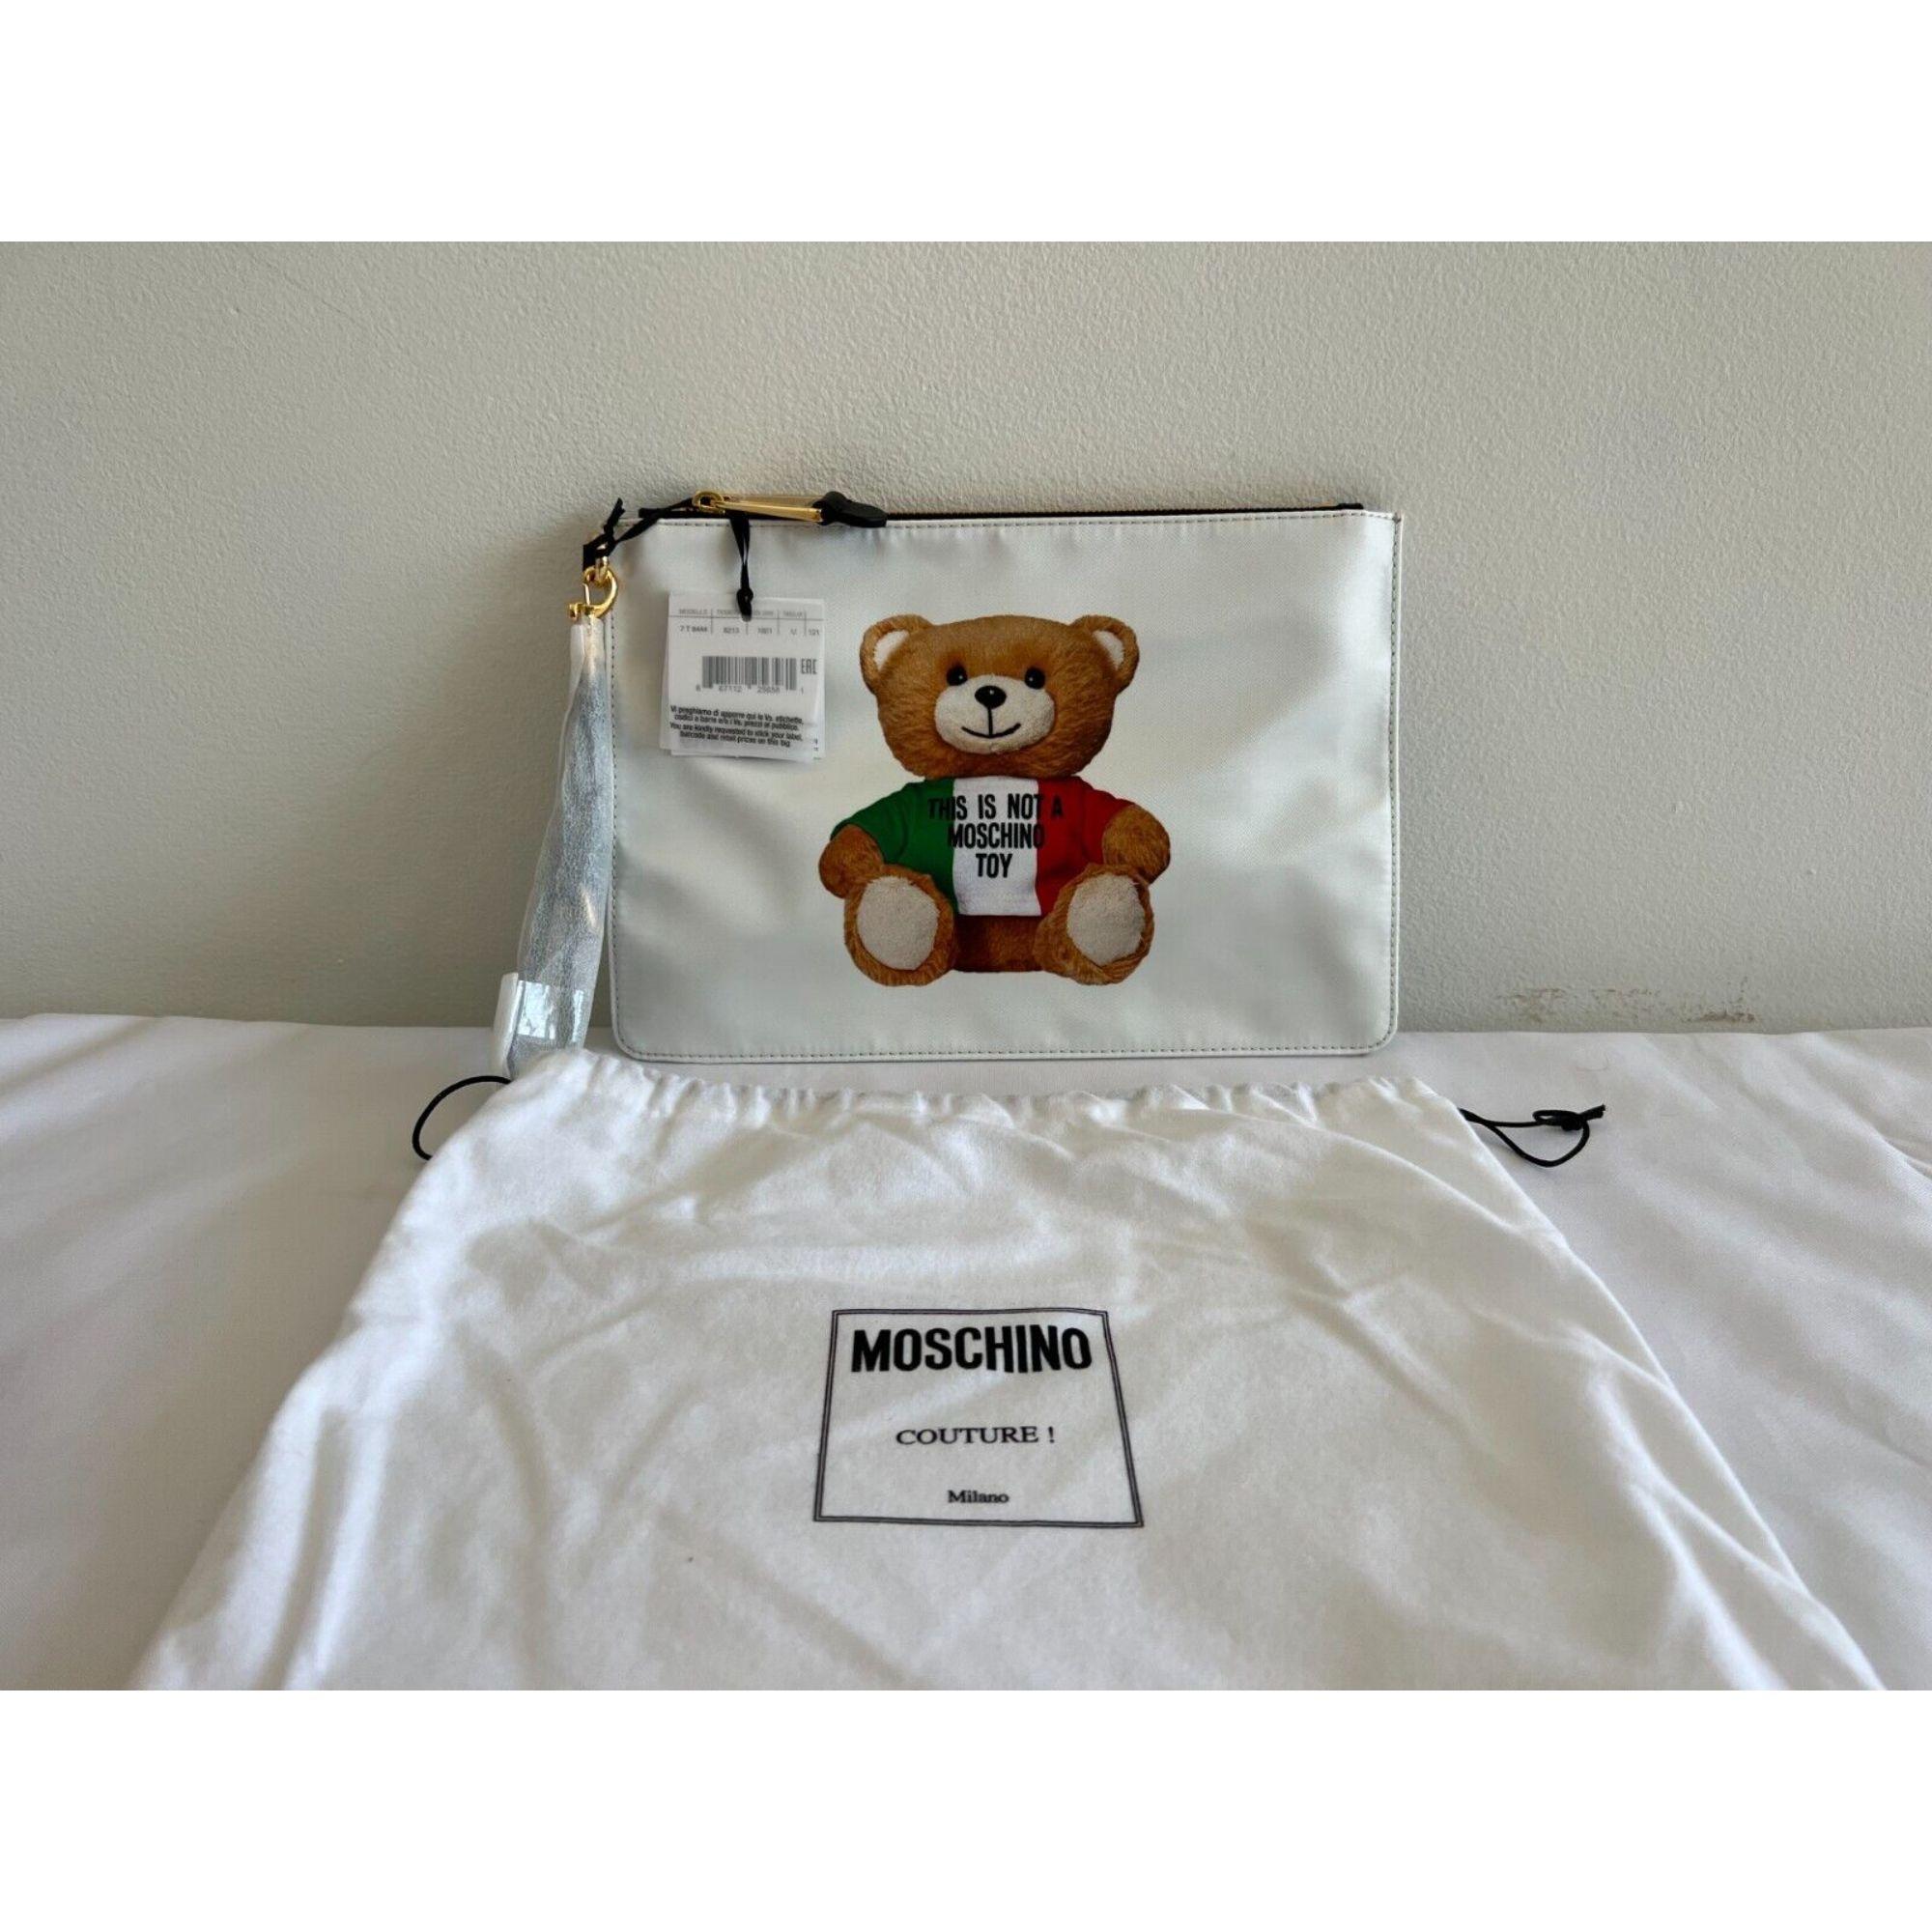 SS21 Moschino Couture Jeremy Scott White Clutch Teddy Bear Wearing Italian FlagT

Additional Information:
Material: 100% PL
Color: White
Size: Medium
Style: Clutch
Dimensions: 7.75